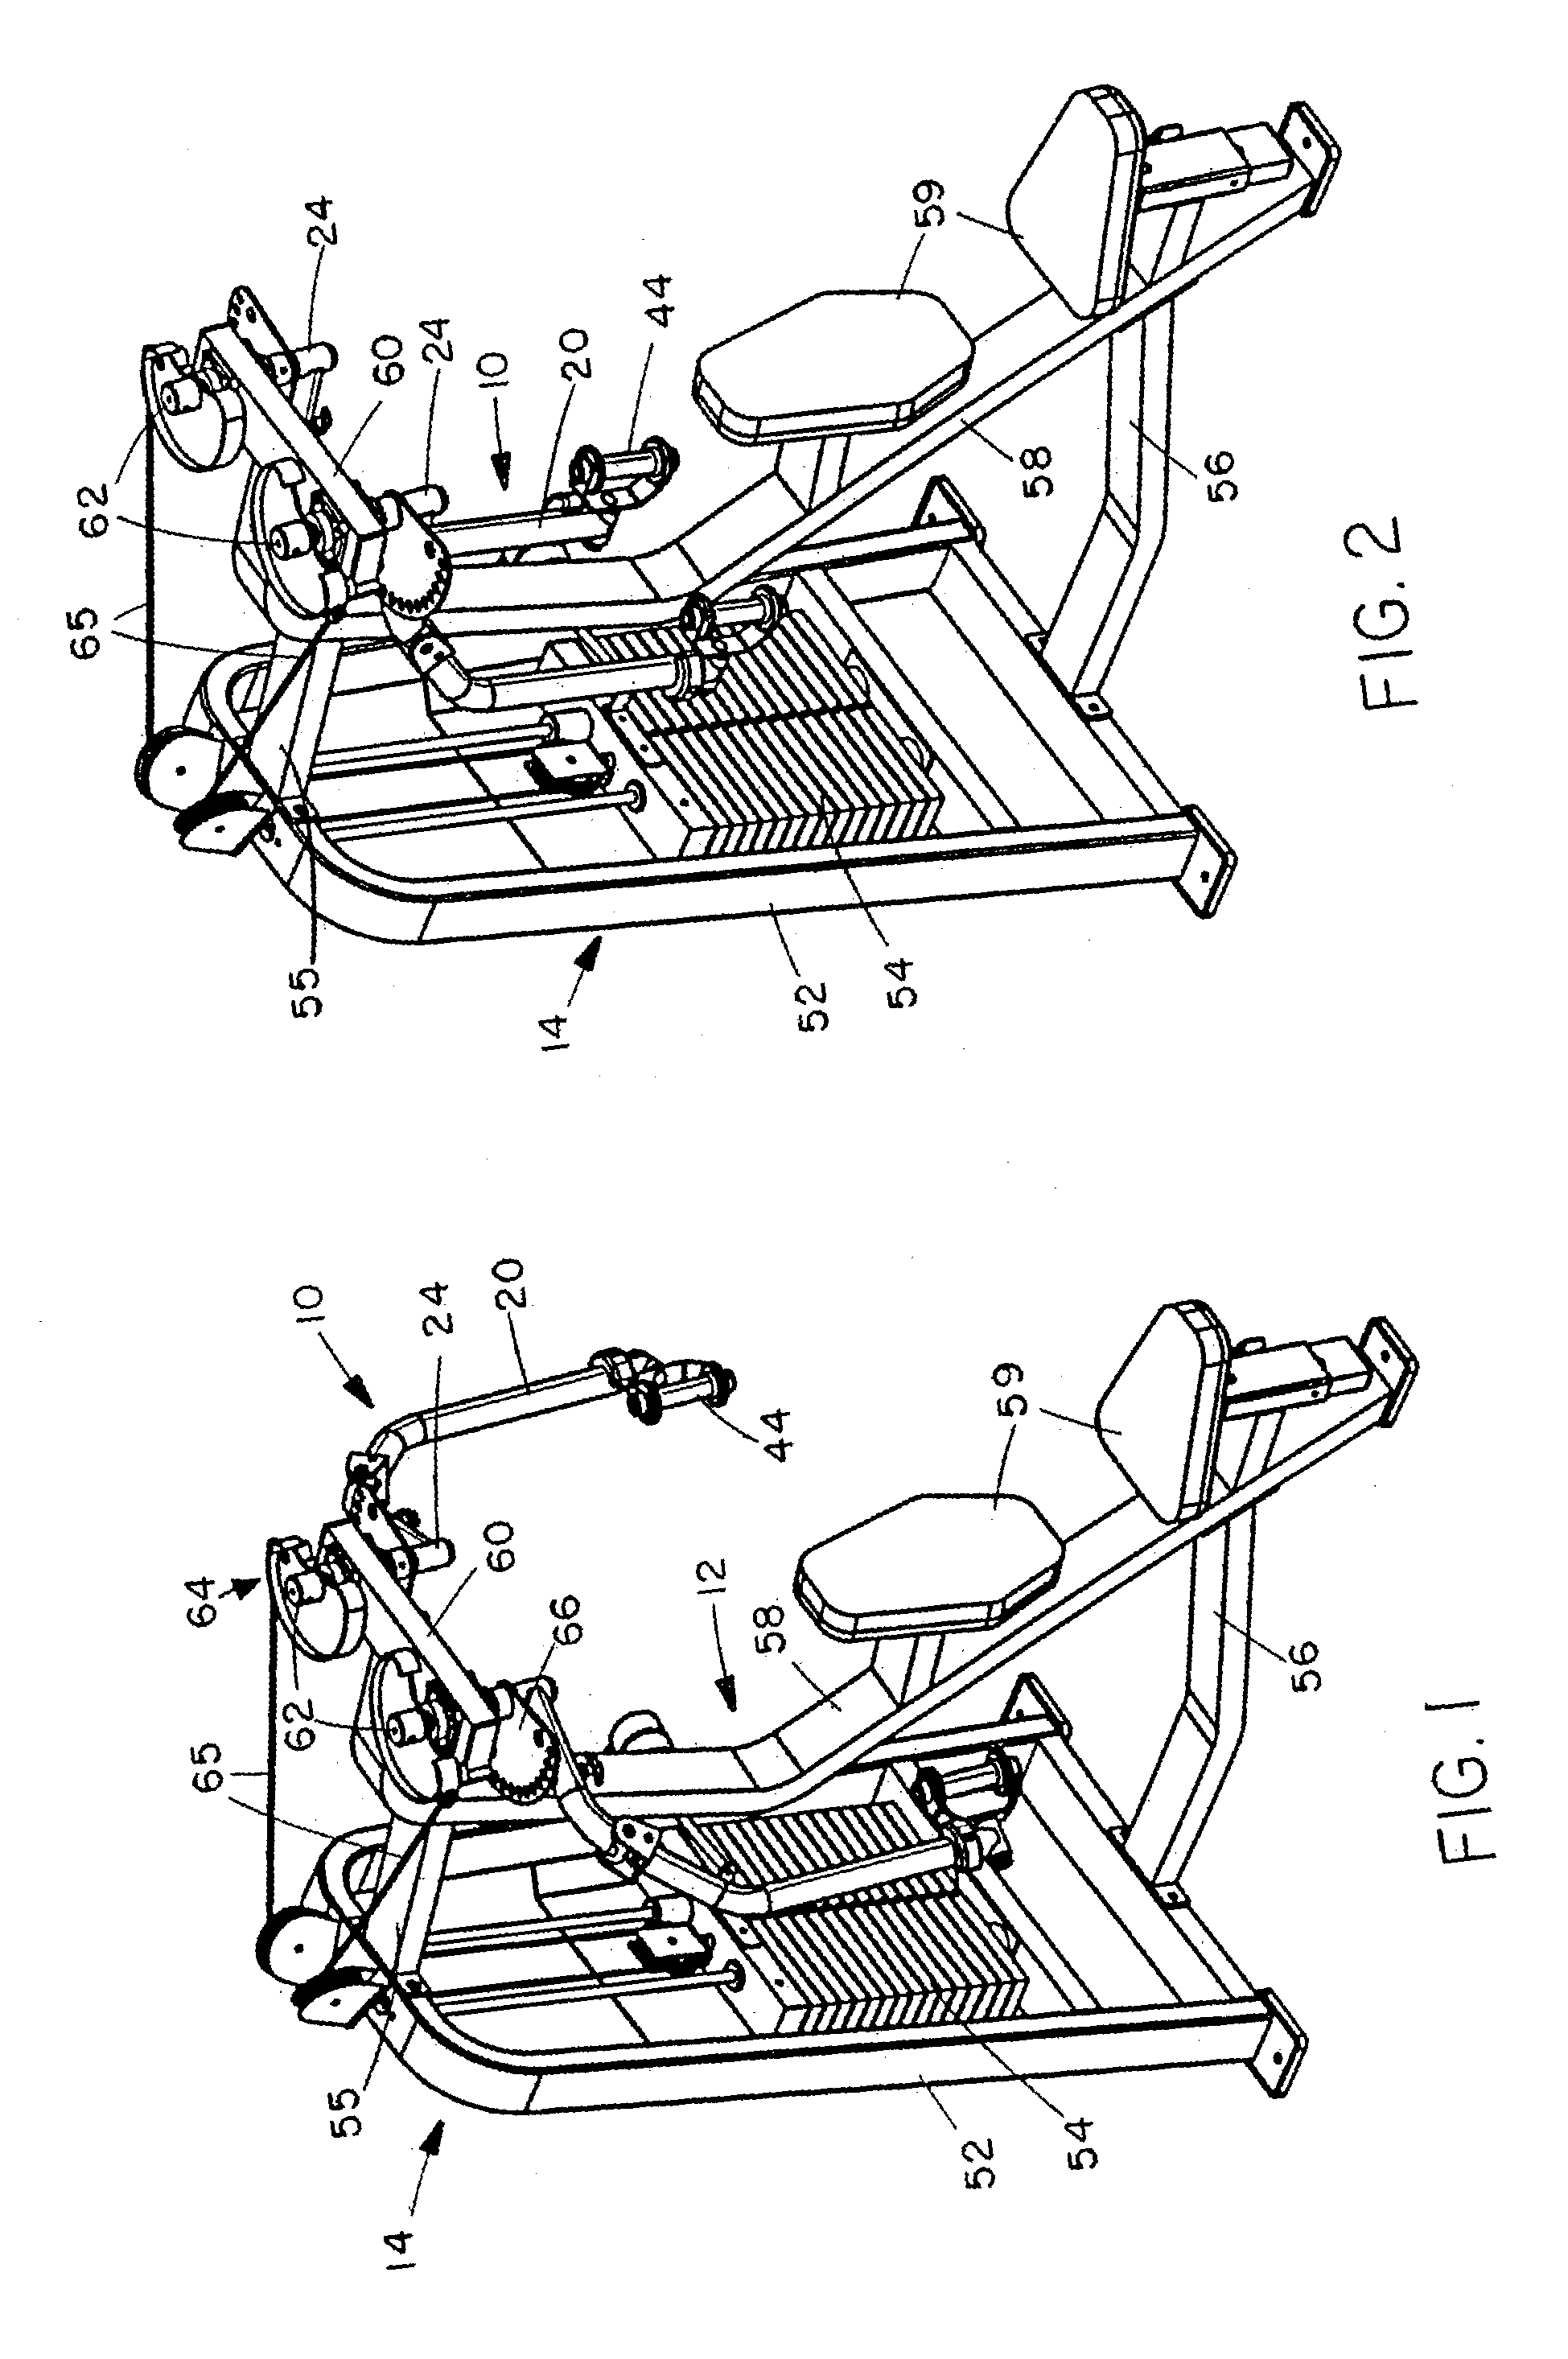 Exercise arm assembly for exercise machine